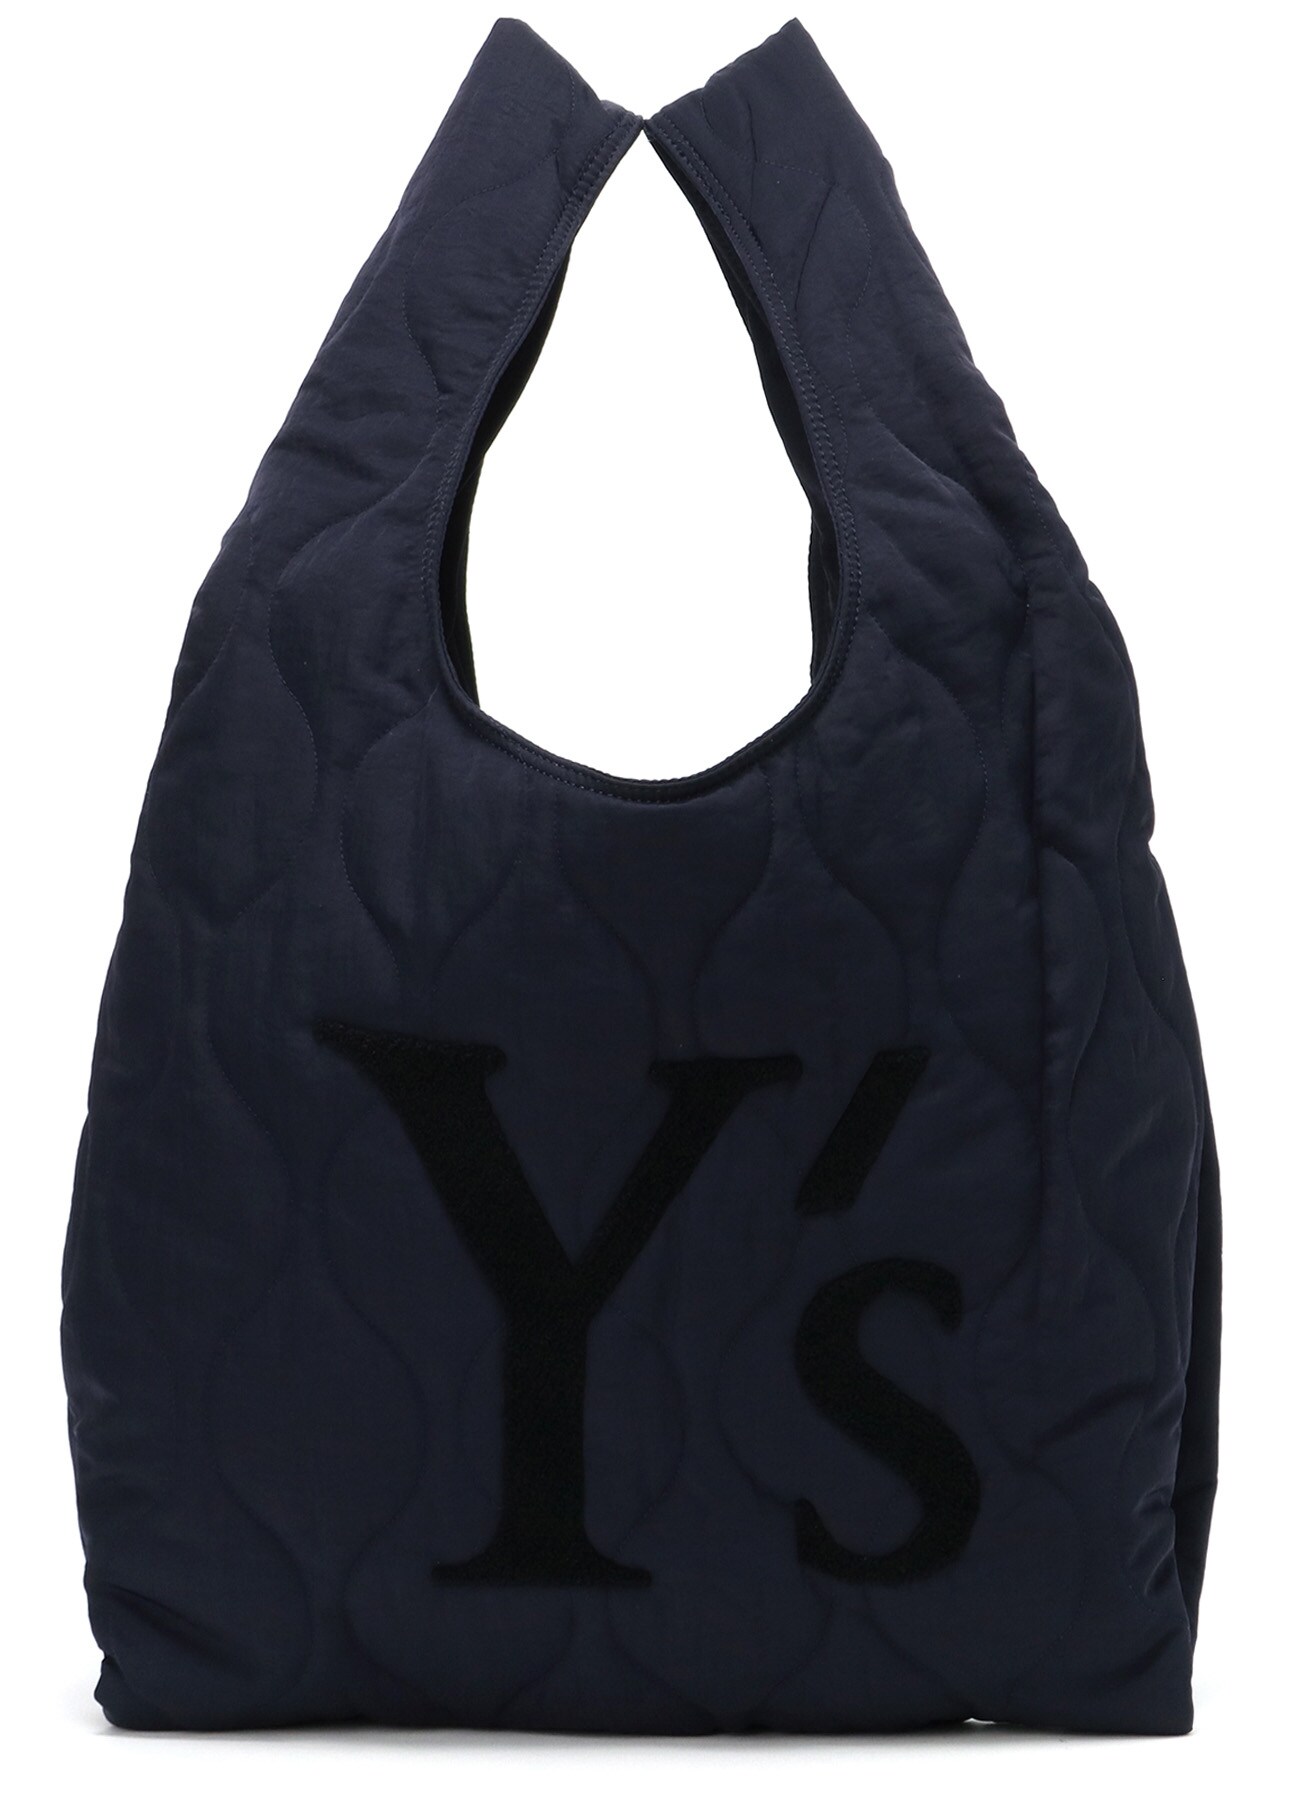 NYLON TWILL QUILT Y's EMBROIDERY BAG